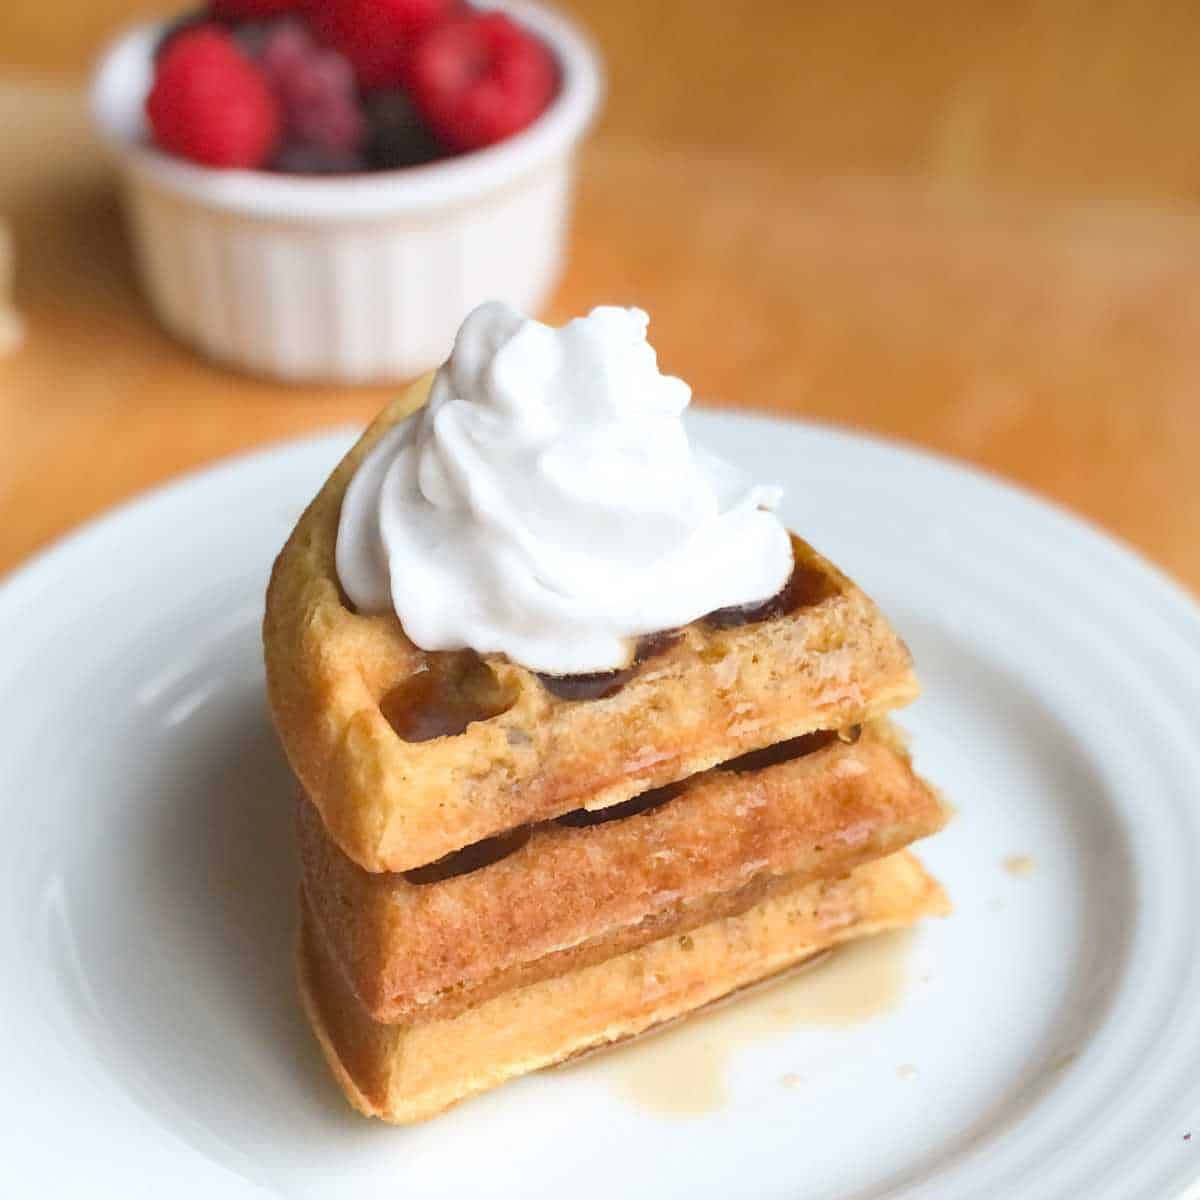 A gluten free waffle topped with dairy free whipped cream